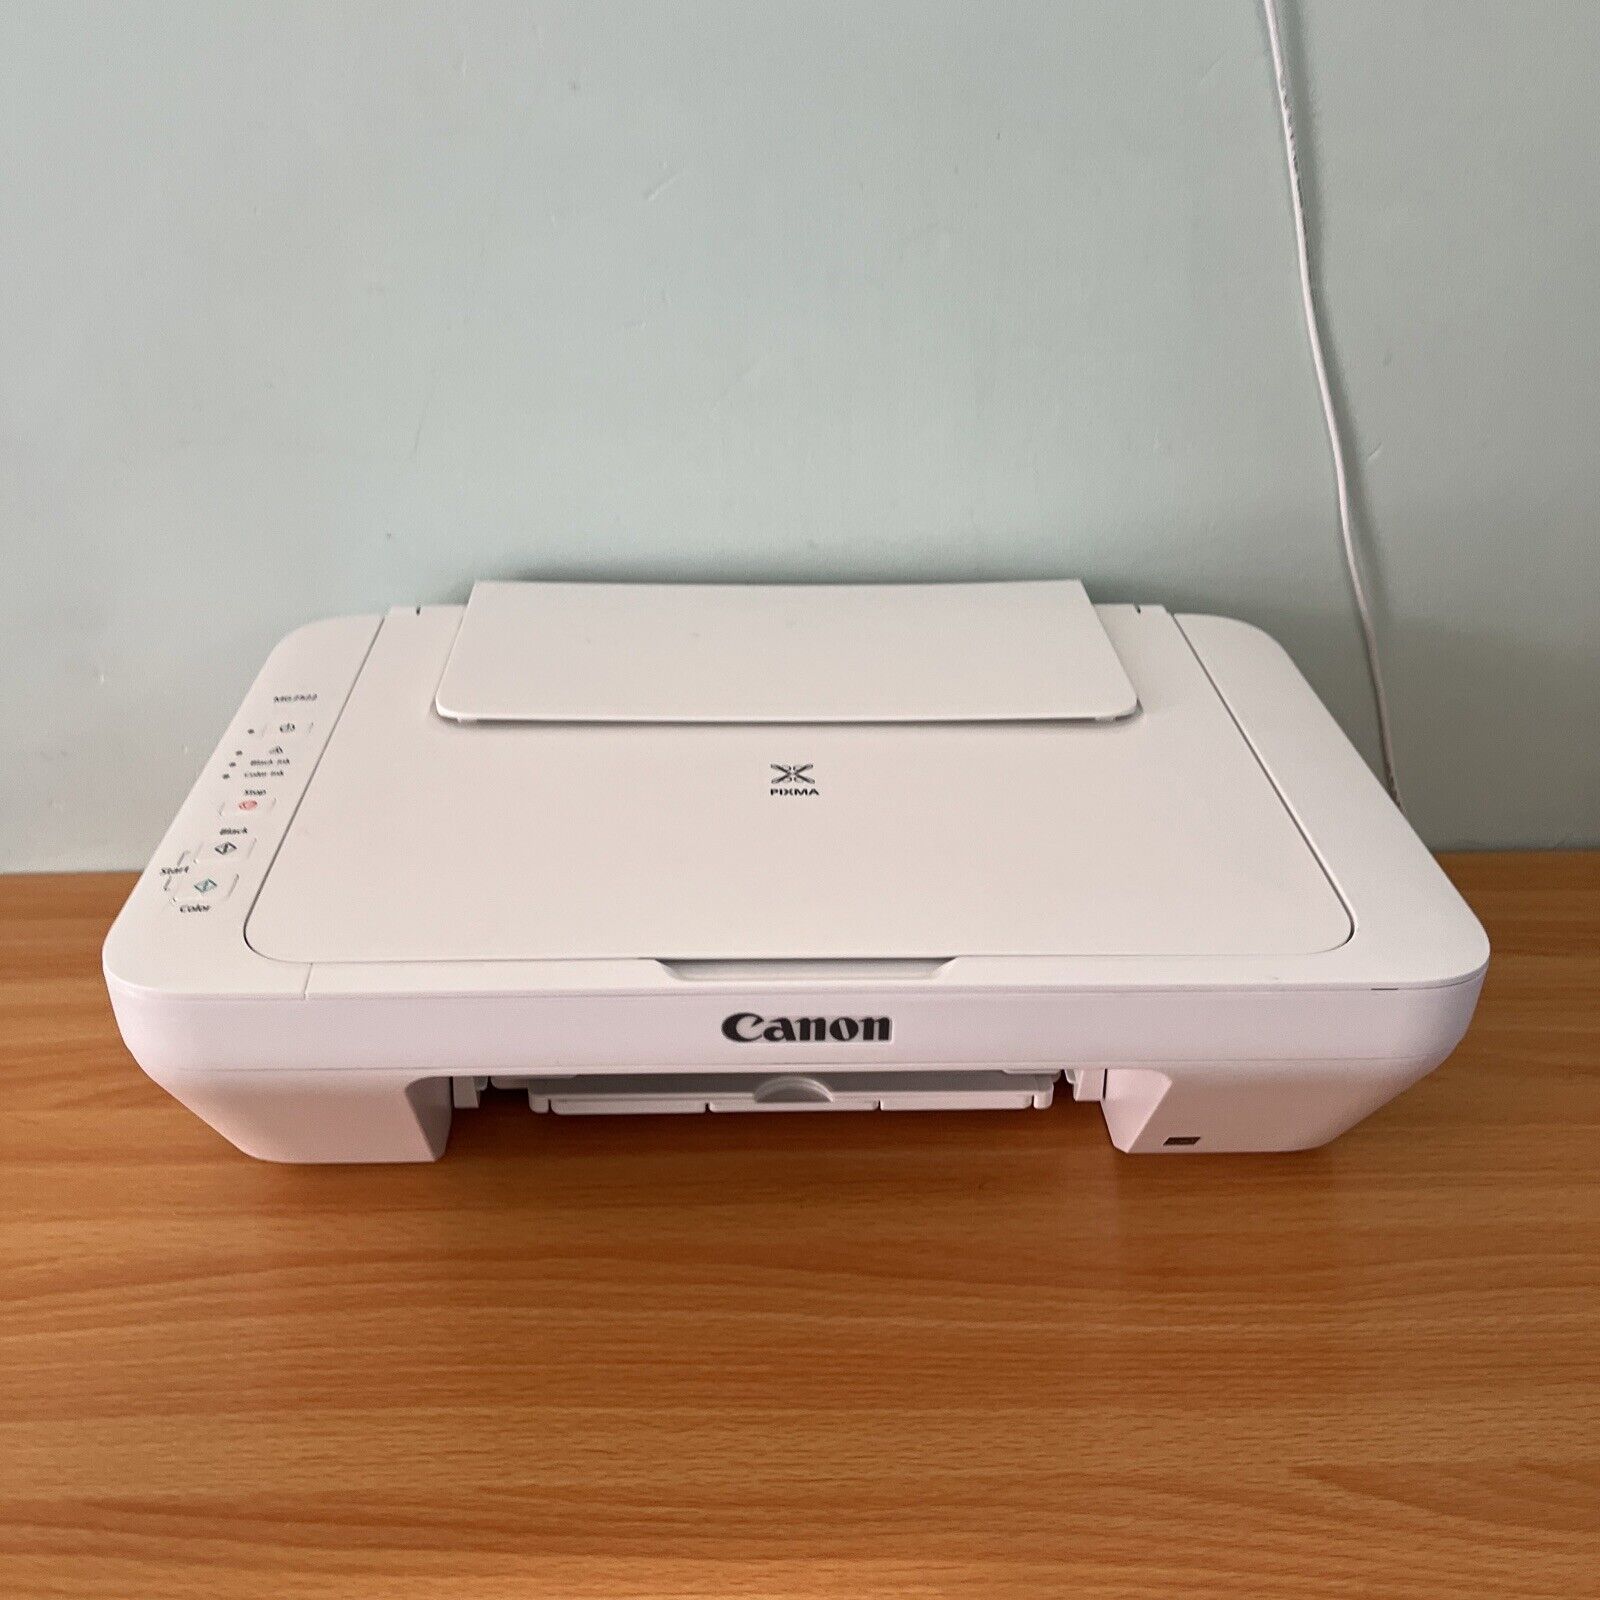 Canon PIXMA MG2522 Wired All-in-One Color Inkjet Printer, White